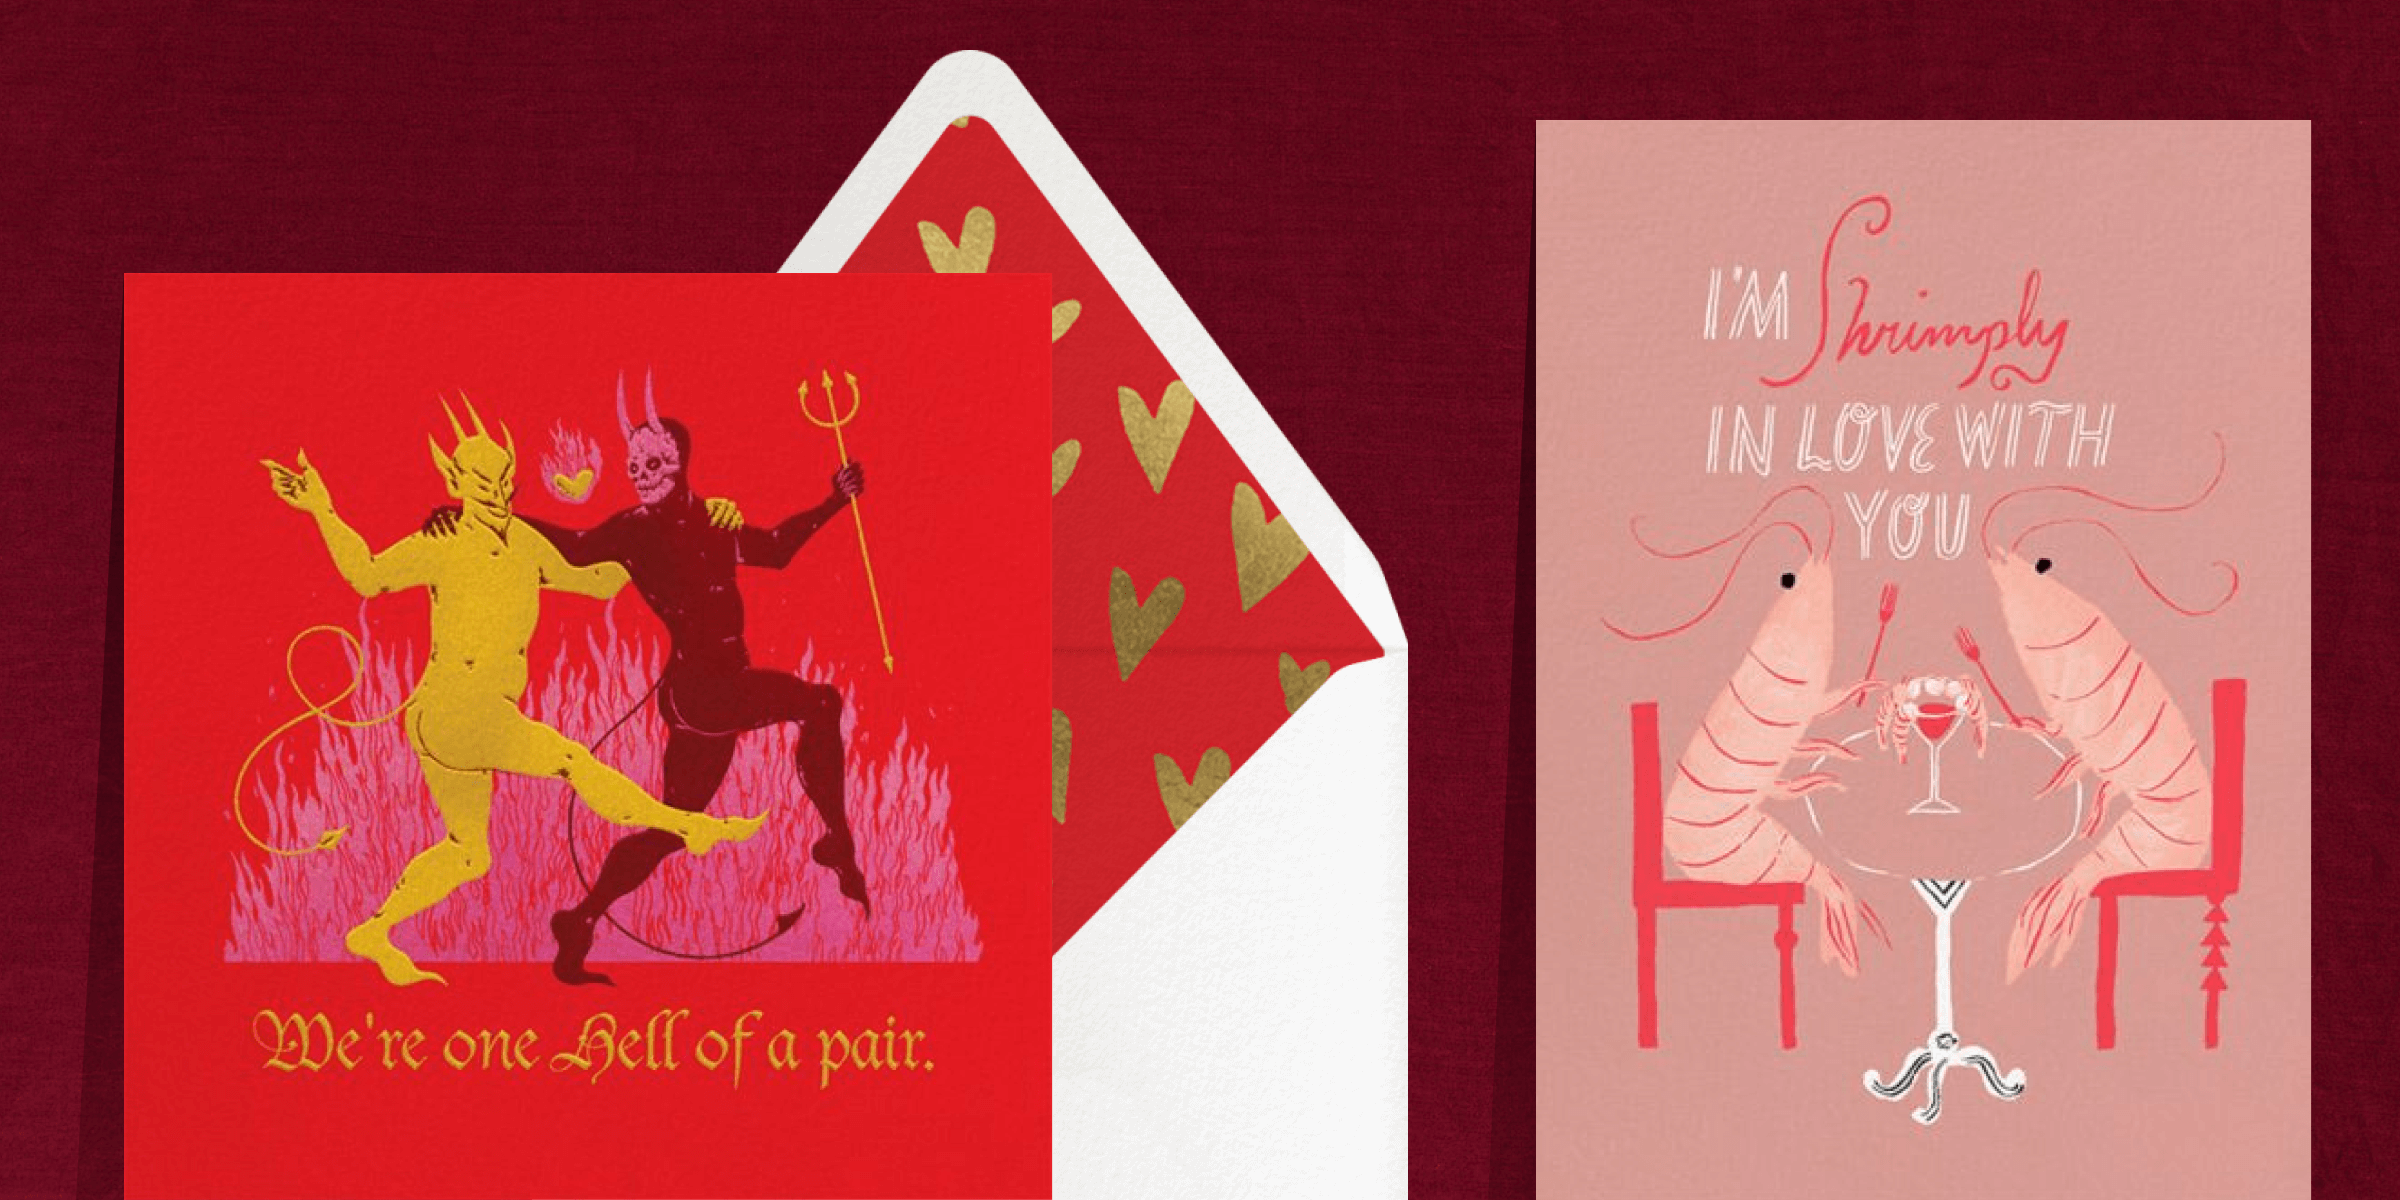 Two side-by-side Valentine’s Day cards. Left - A square red card featuring an illustration of two naked devils with their arms around each other with the phrase “we’re one hell of a pair.” Right - A pink card featuring an illustration of two shrimp dining together with the phrase “I’m shrimply in love with you.” The red card is paired with a white envelope with a red and gold heart liner.